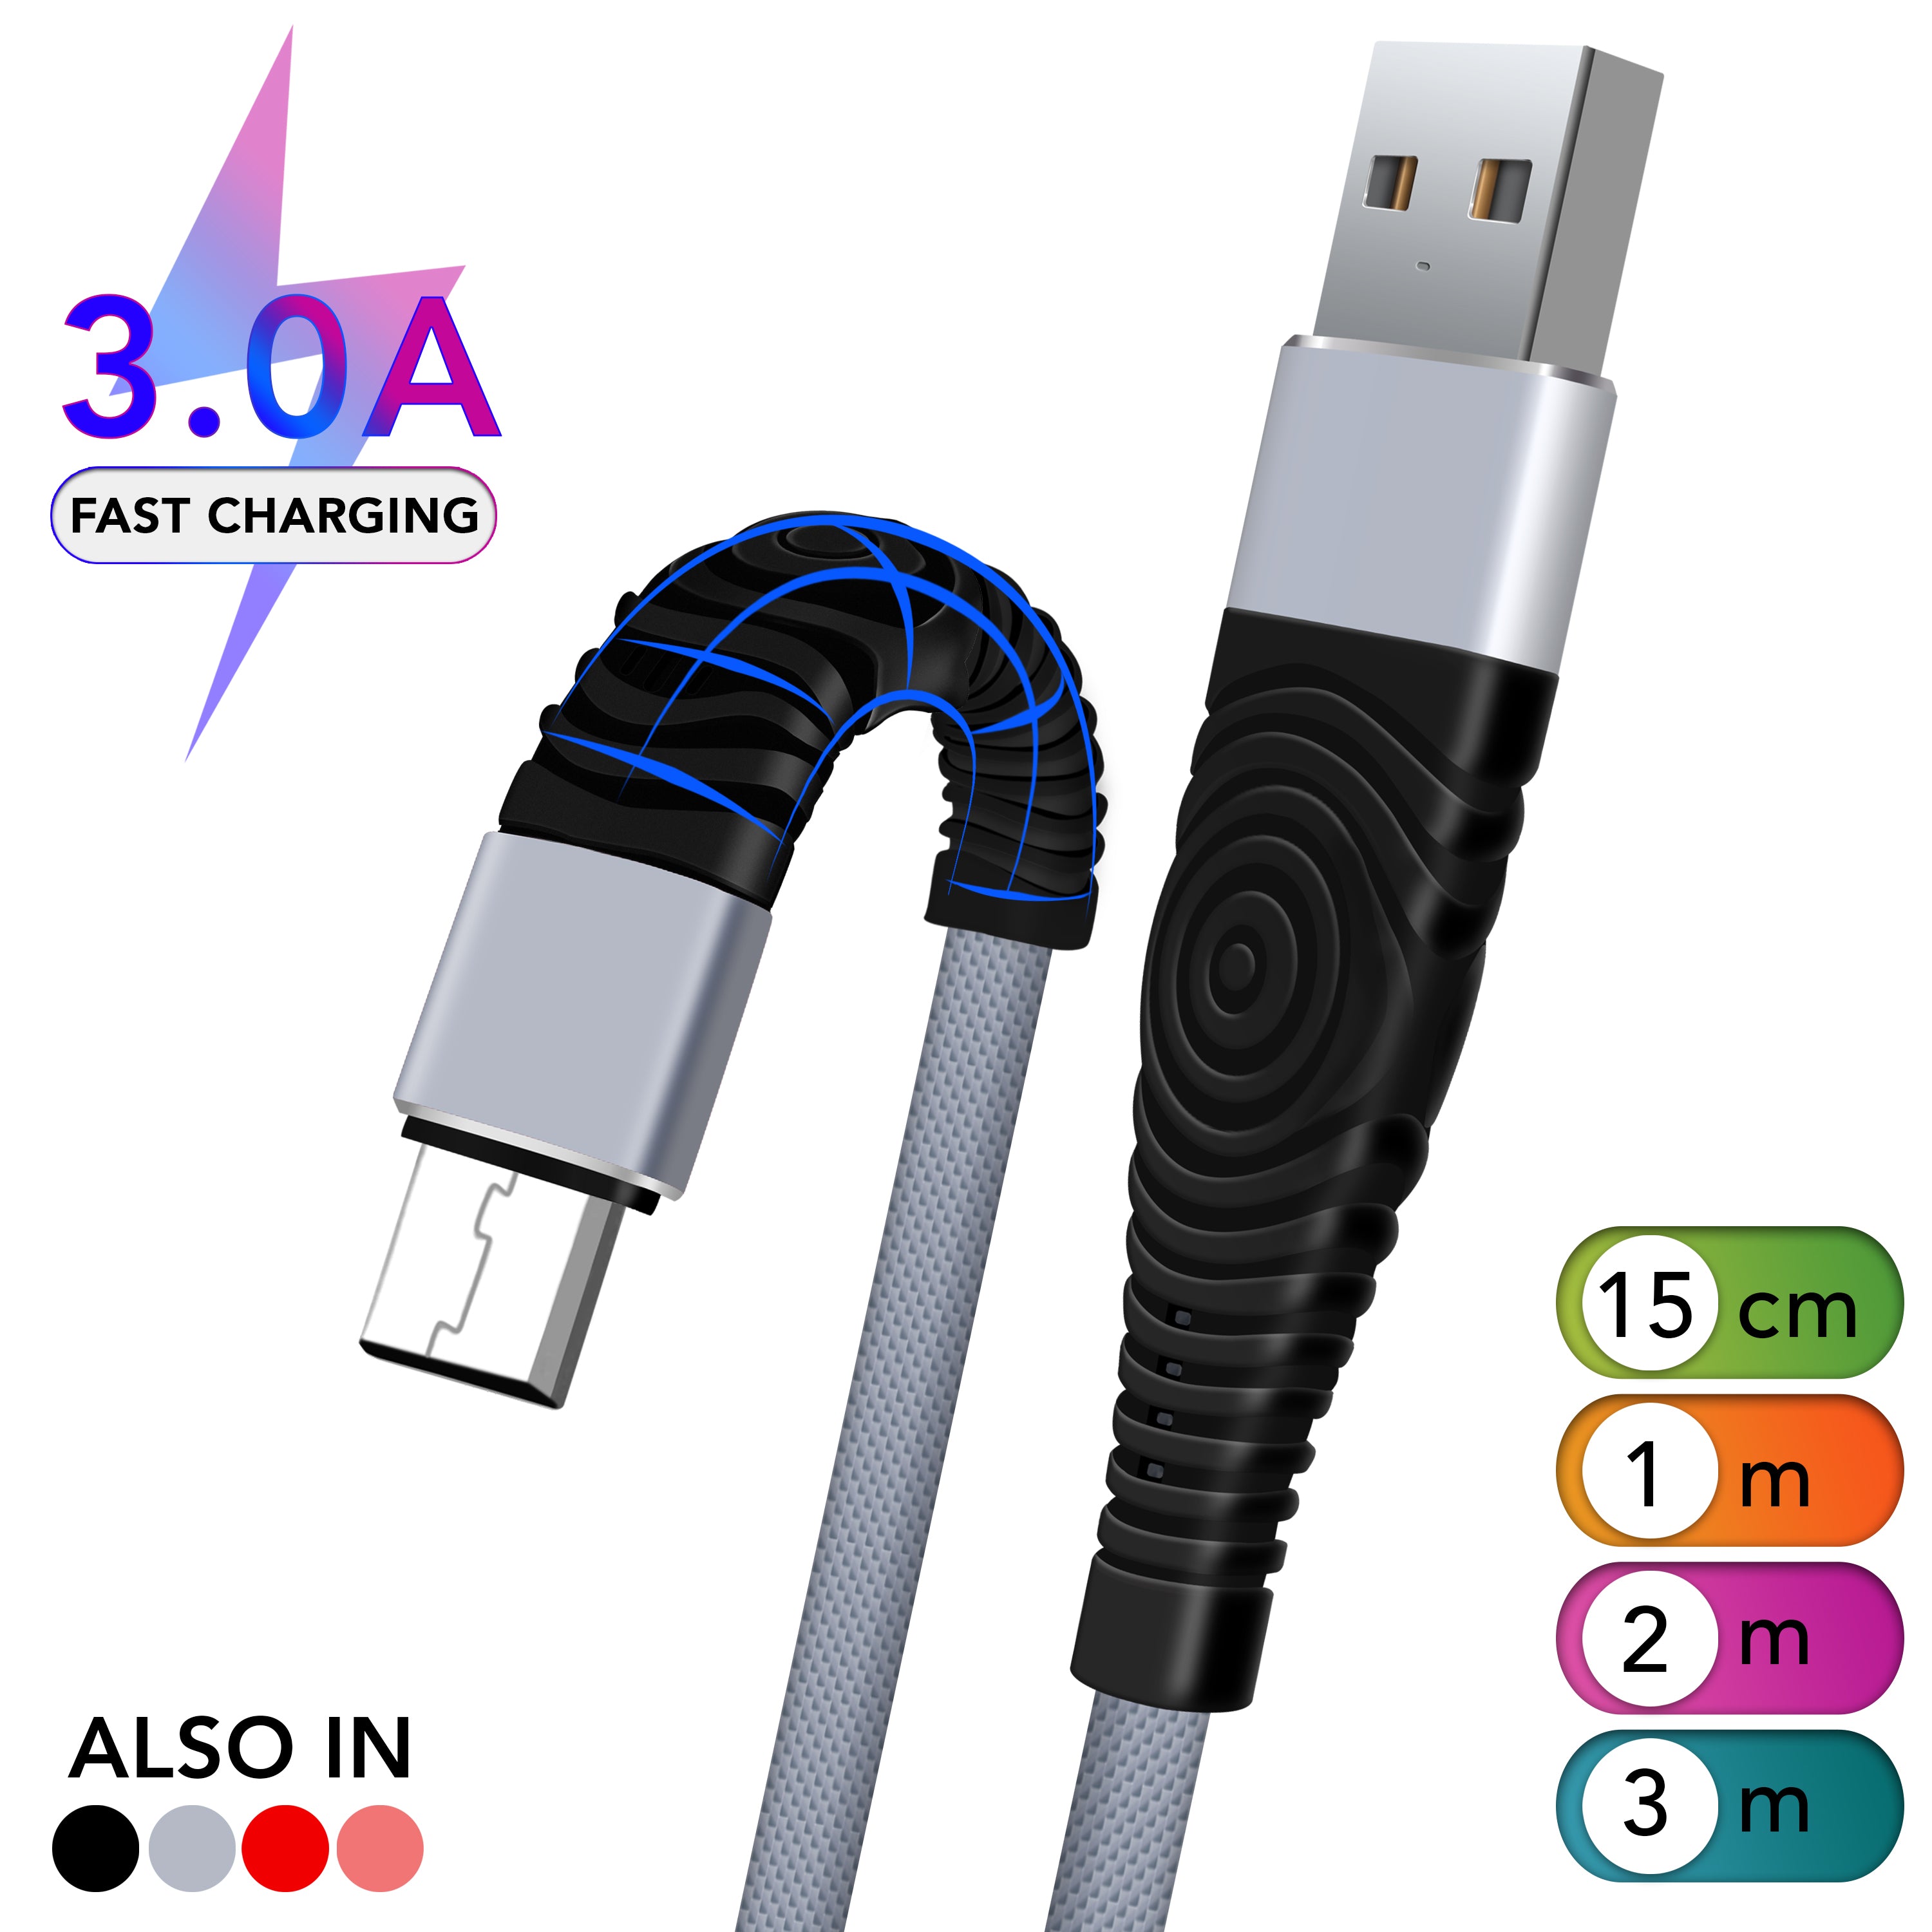 Heavy Duty Nylon Braided Micro USB Cable for Data Sync and Fast Charging